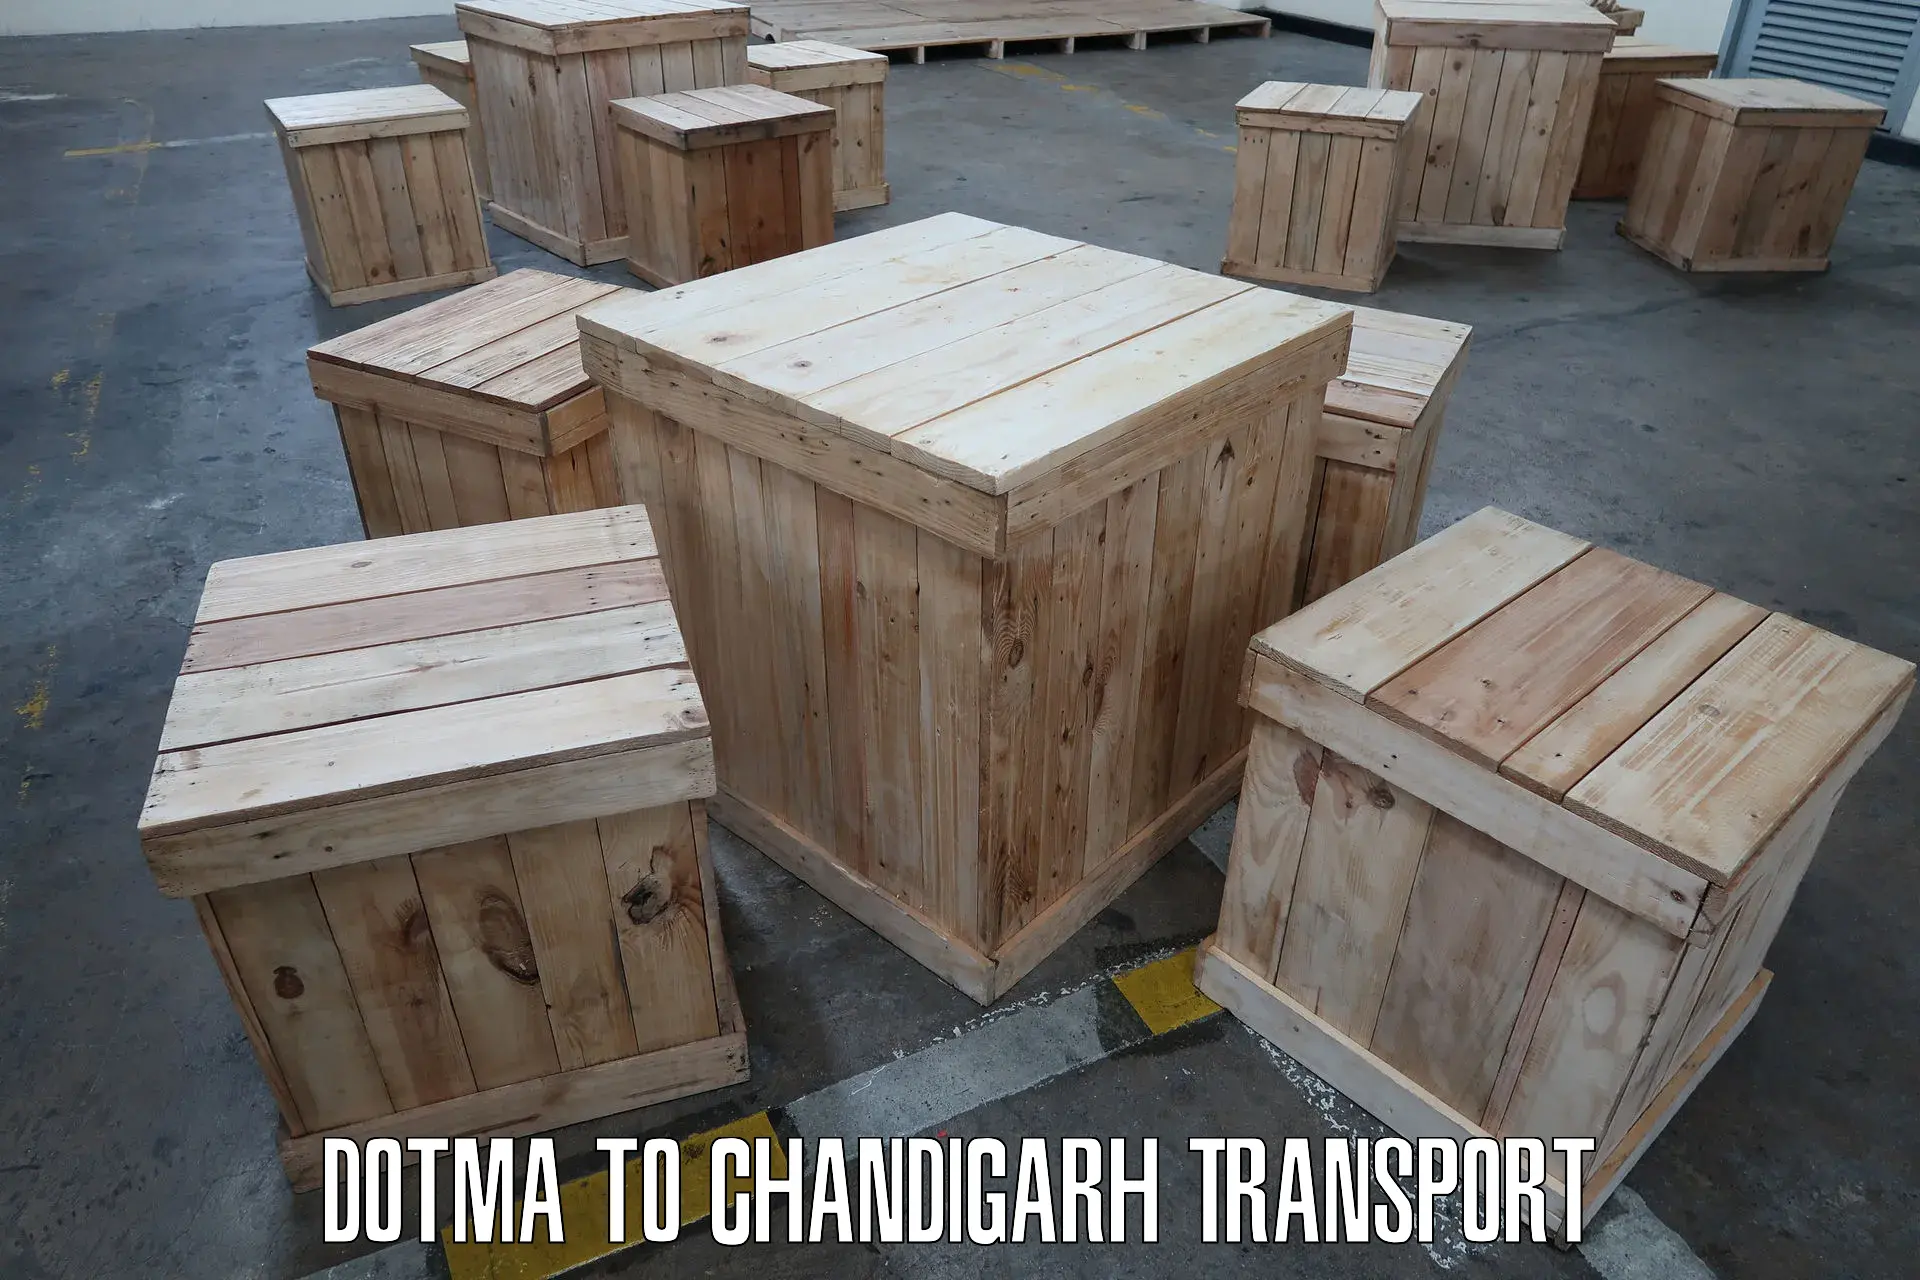 Goods delivery service Dotma to Chandigarh